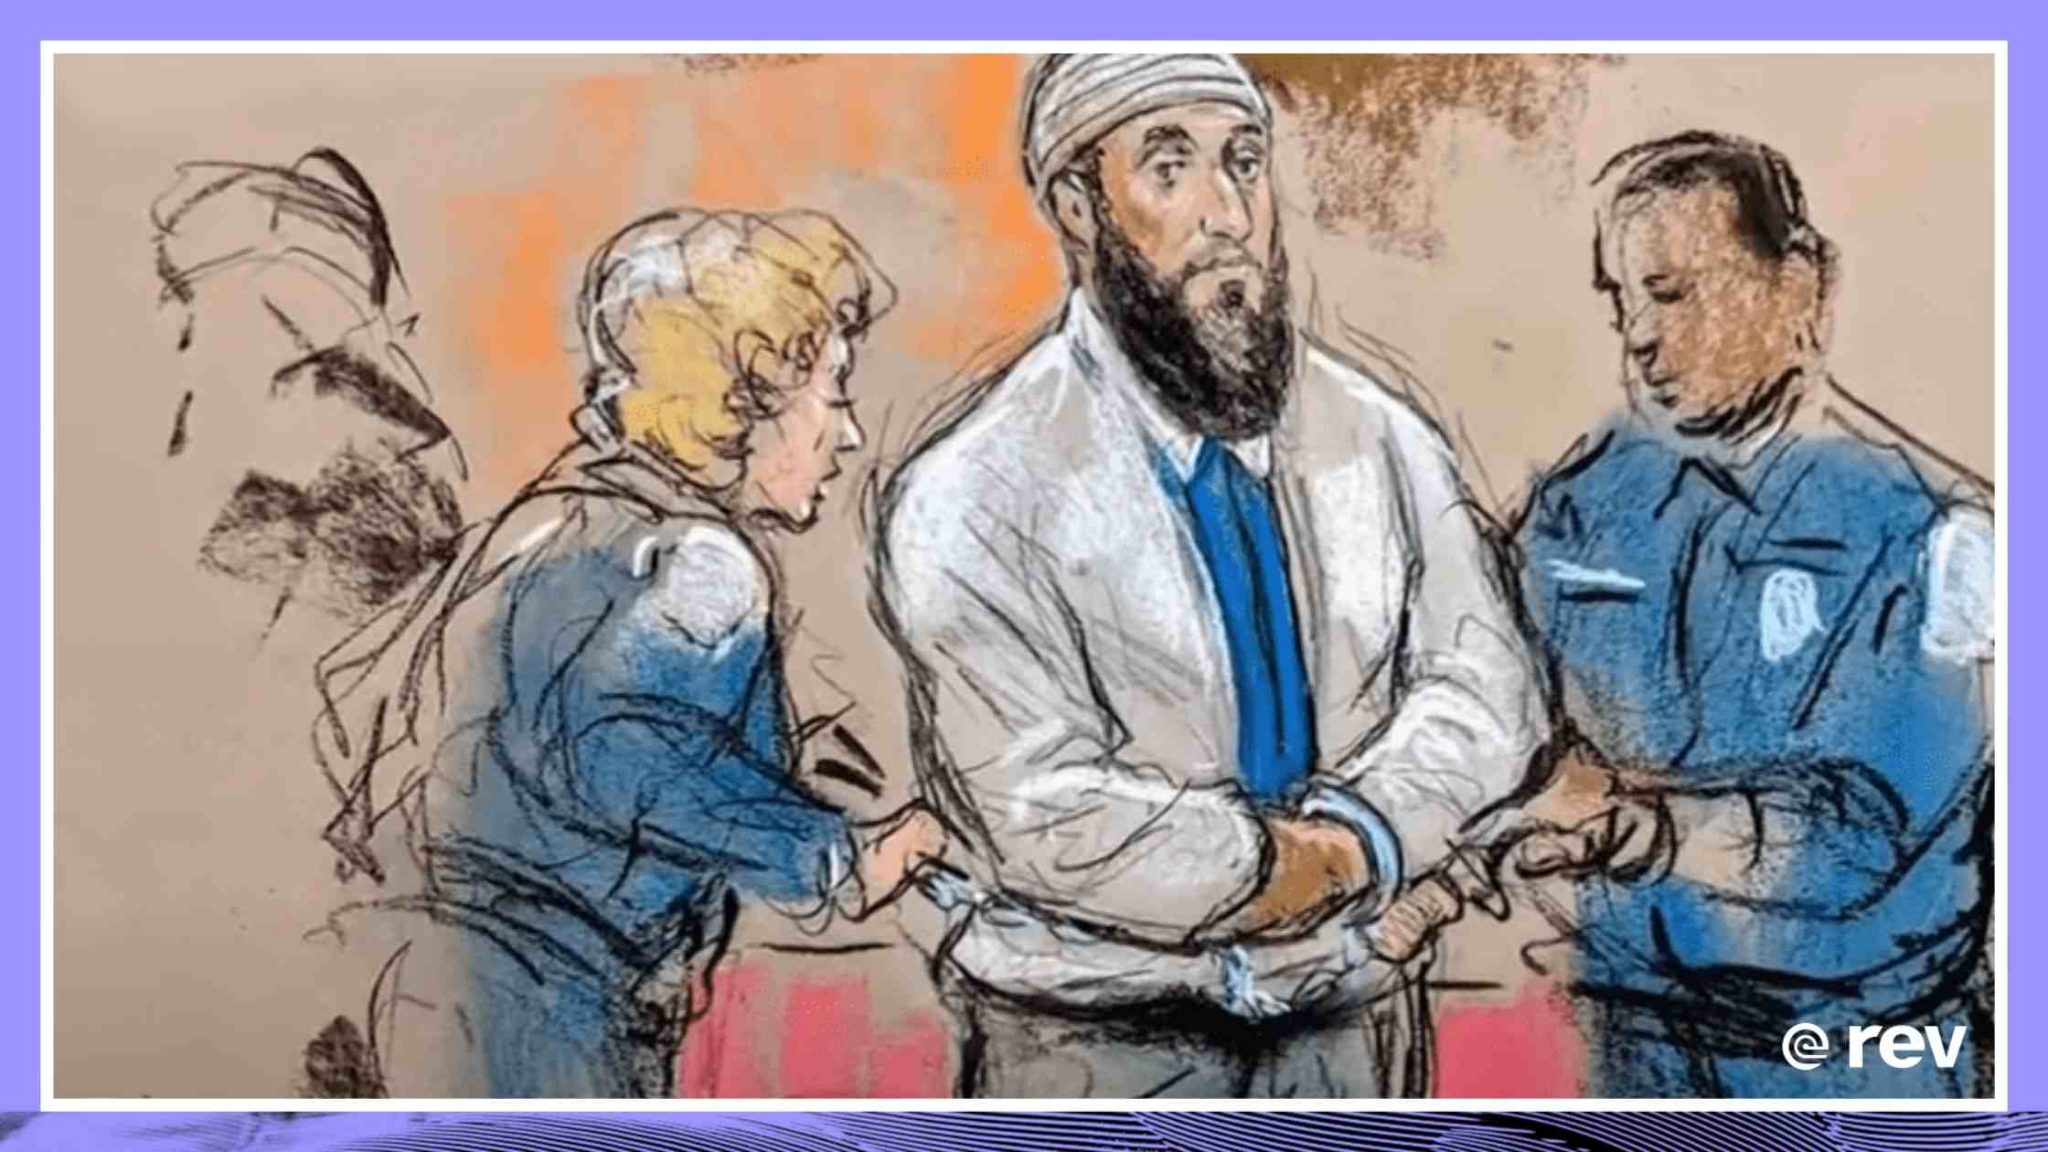 Adnan Syed murder conviction vacated Transcript